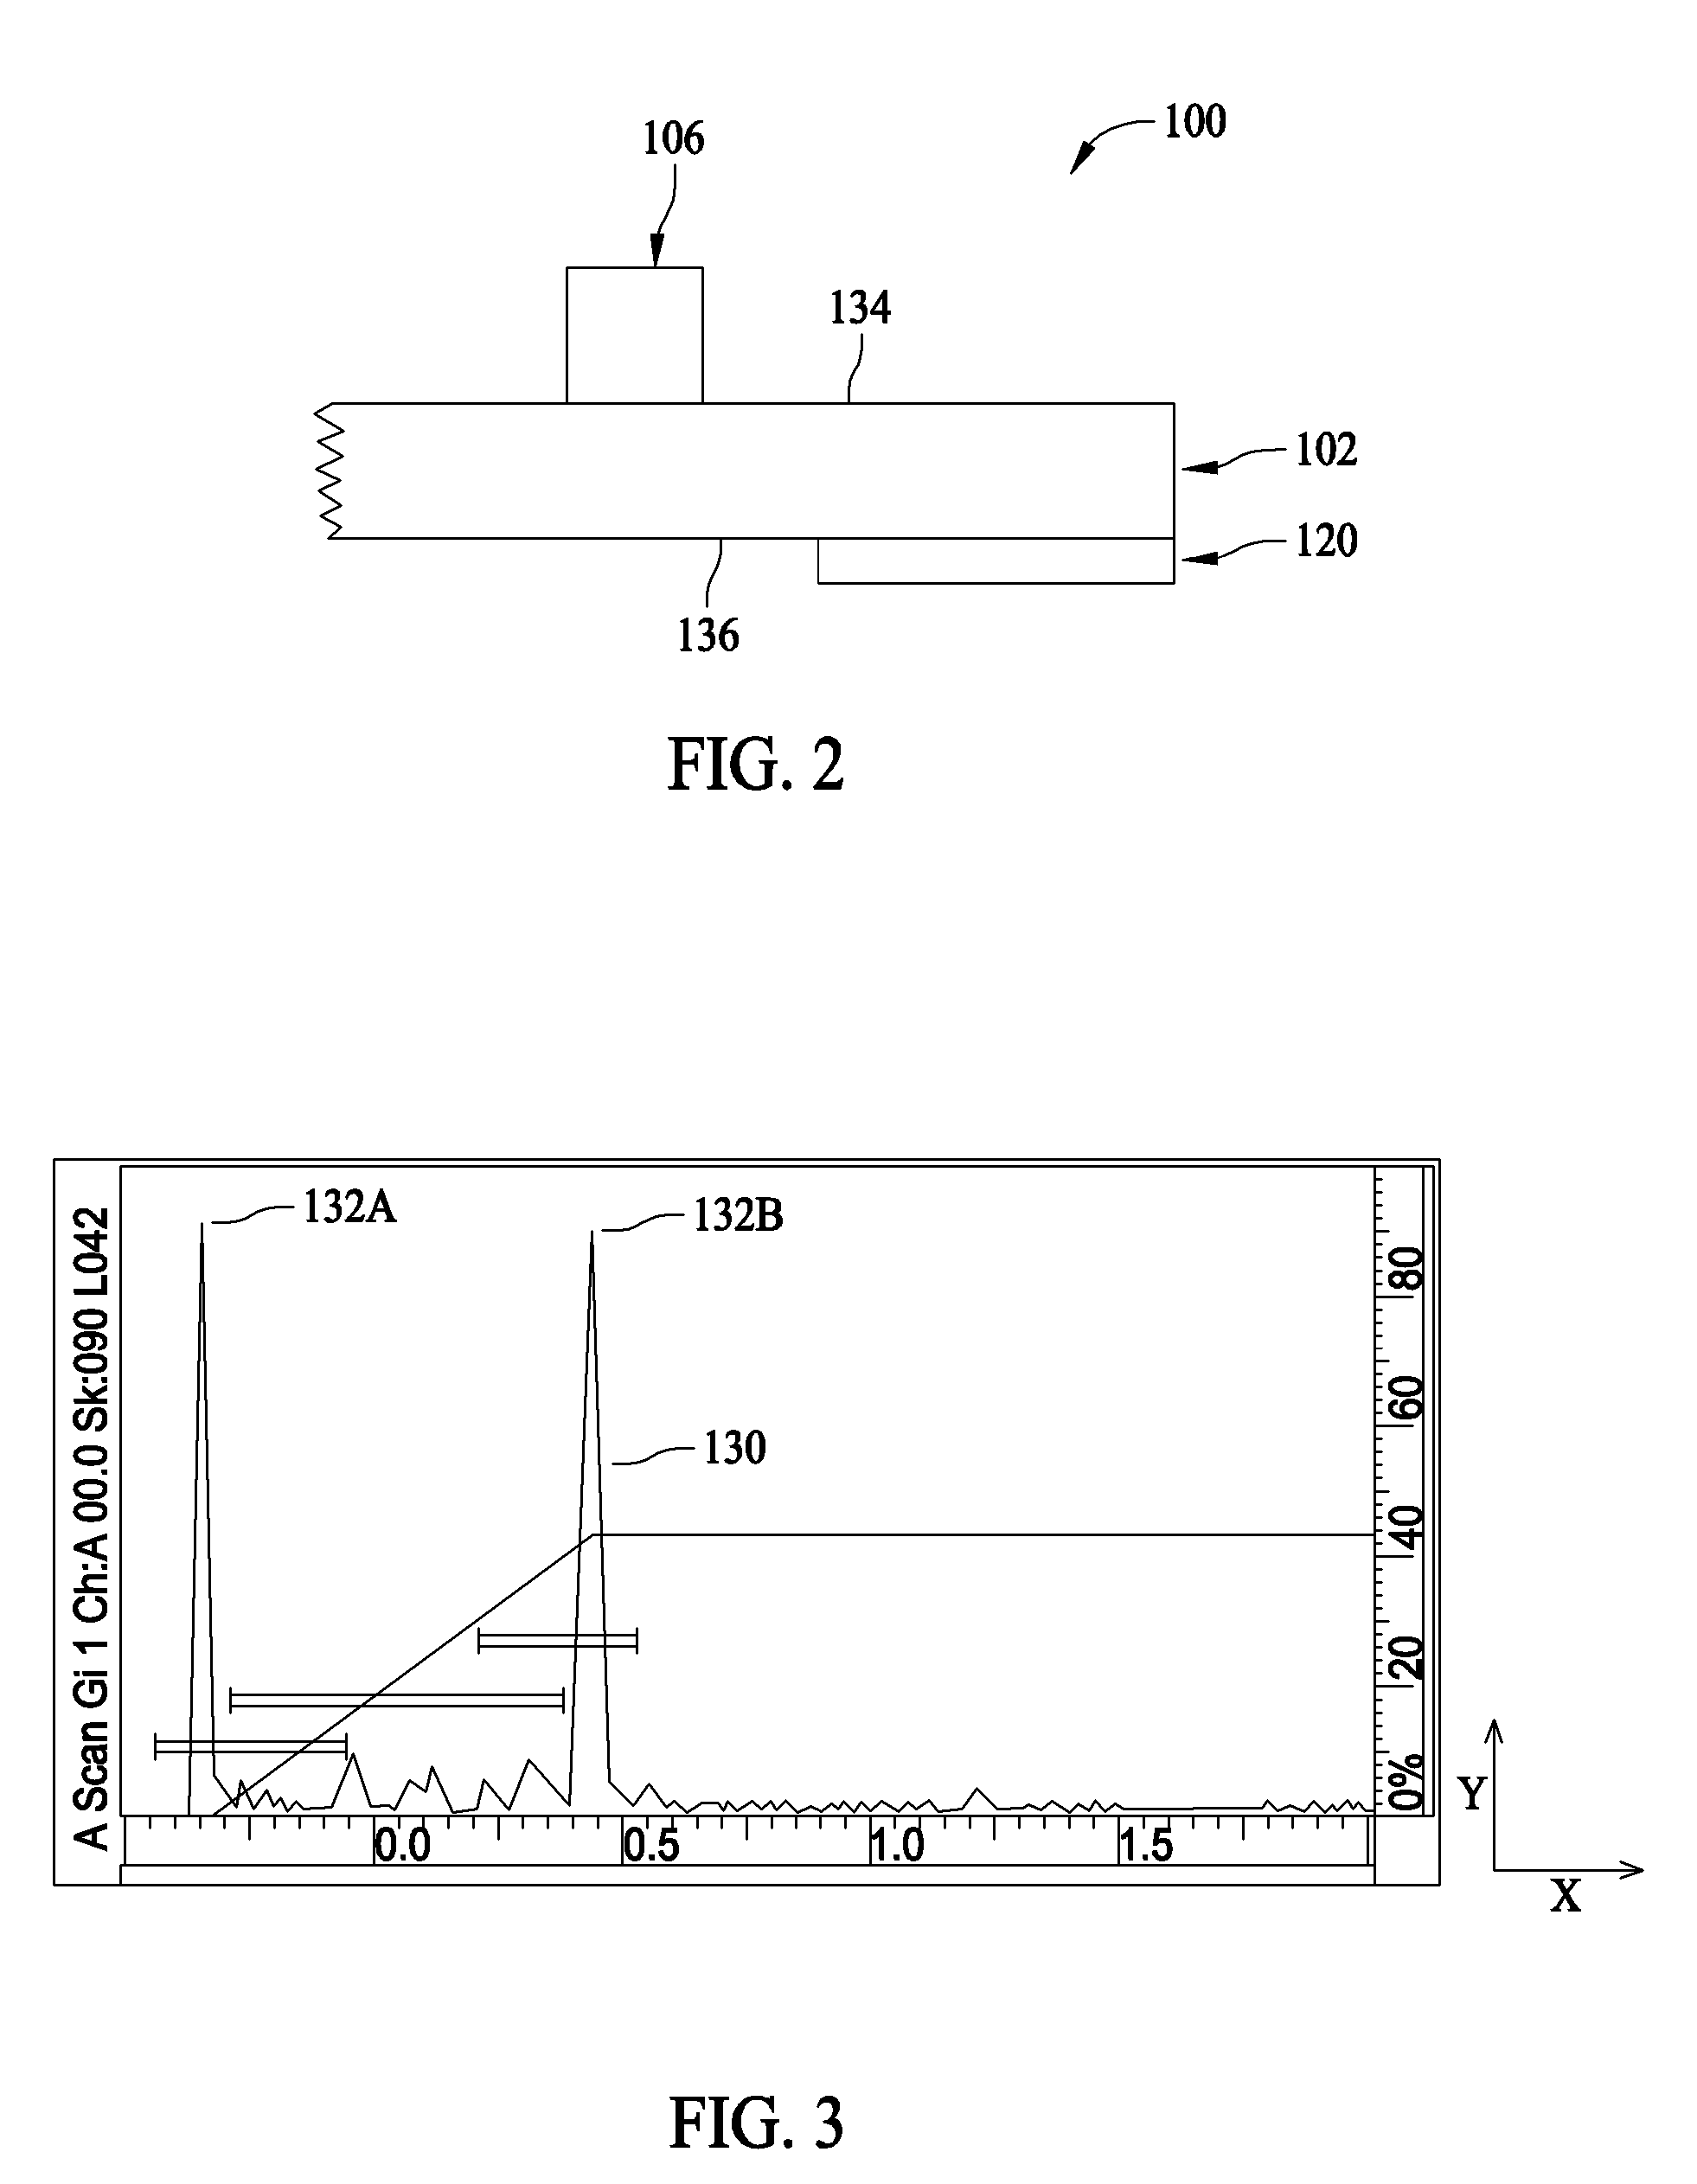 Immersion ultrasonic test part holder, system and method for nondestructive evaluation